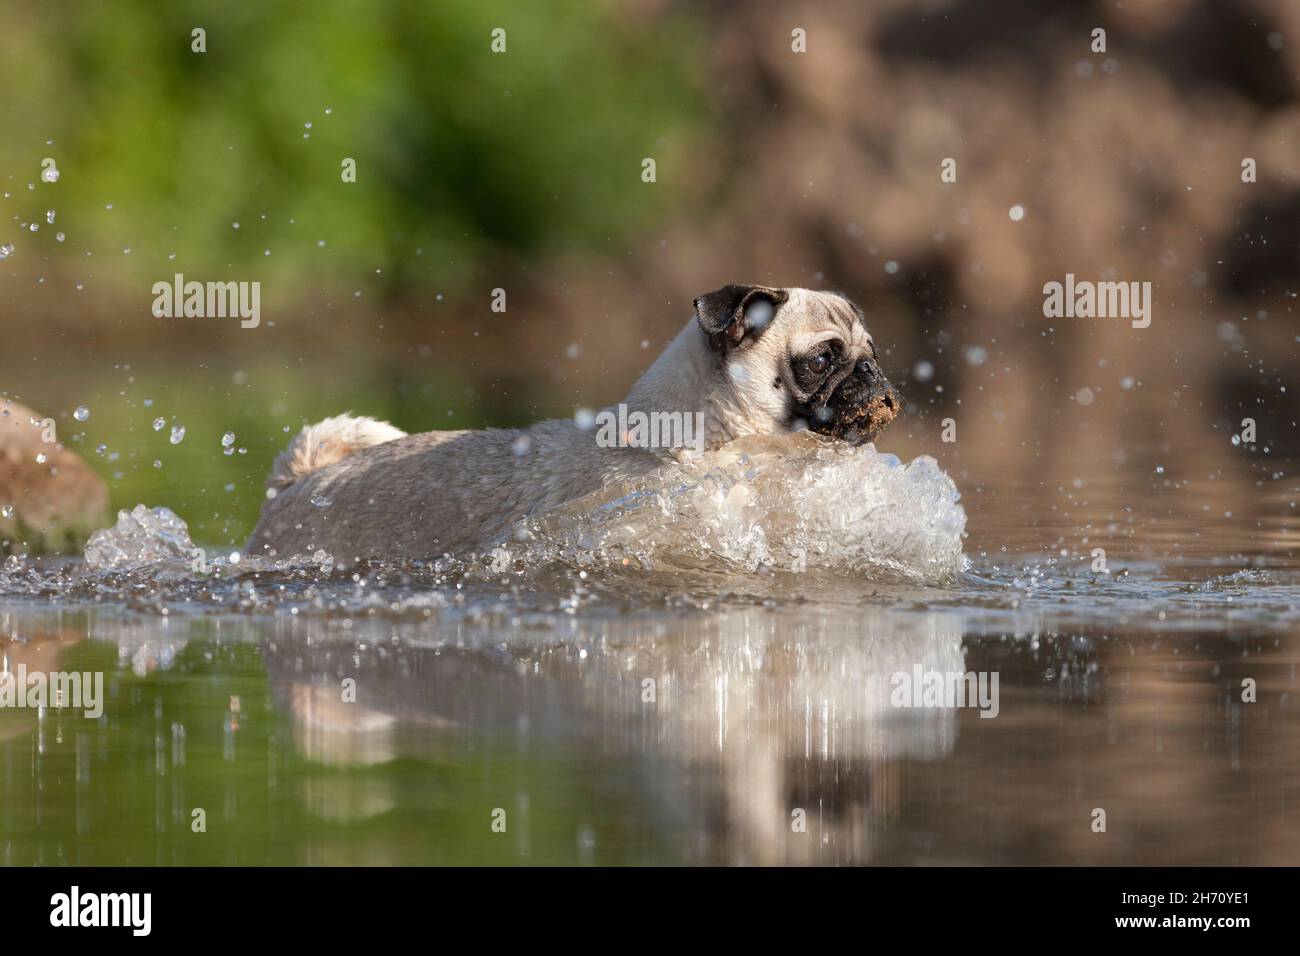 Pug. Adult dog running in water. Germany Stock Photo